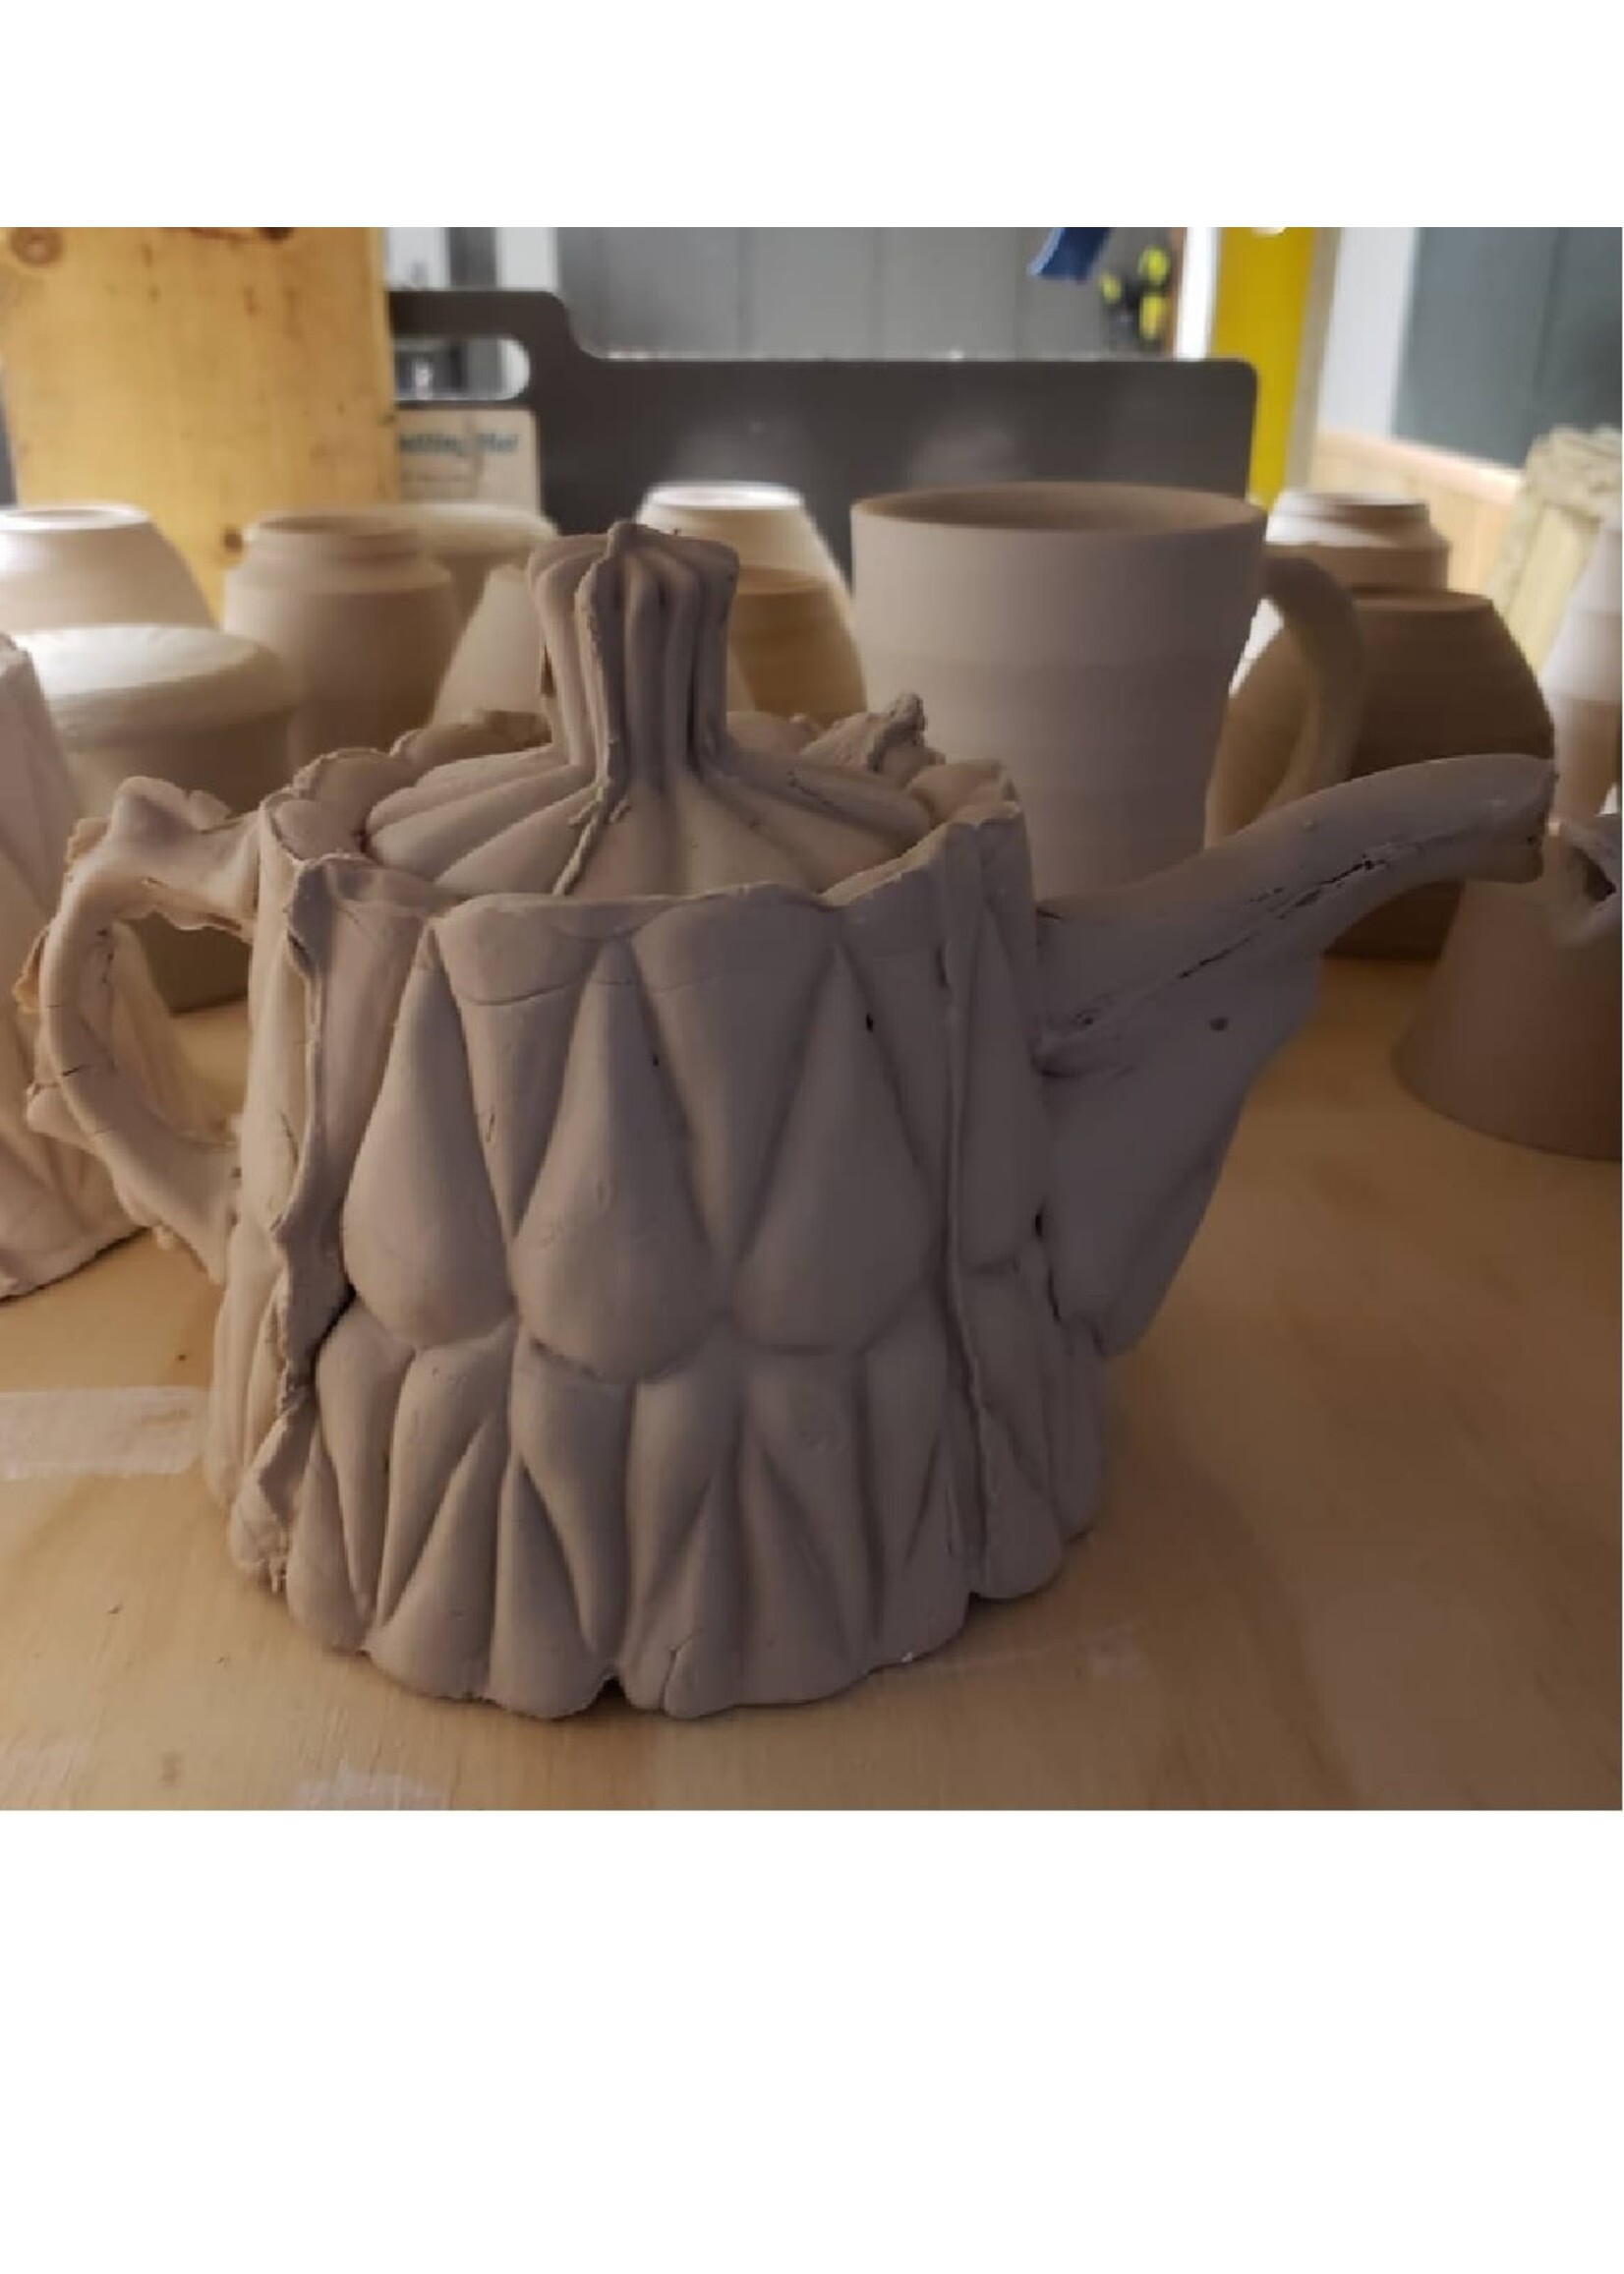 5 Week Teapot Class Aug 19th- Sept 23rd from 630pm-830pm (Skipping Labor Day)